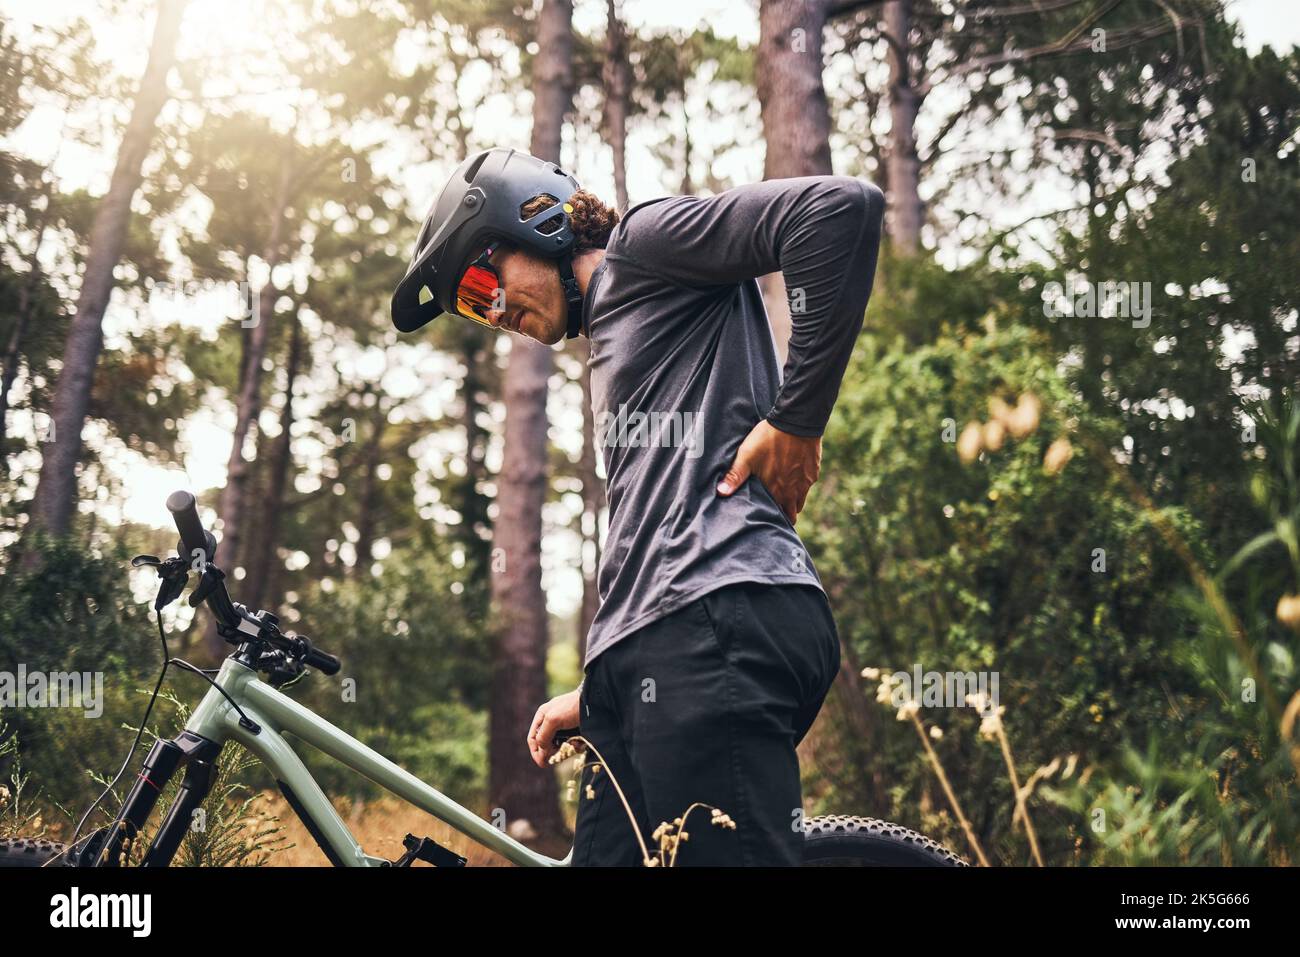 Bicycle, back pain injury and man in forest cycling for fitness, outdoor travel or sports wellness with nature lens flare. Marathon sport person Stock Photo